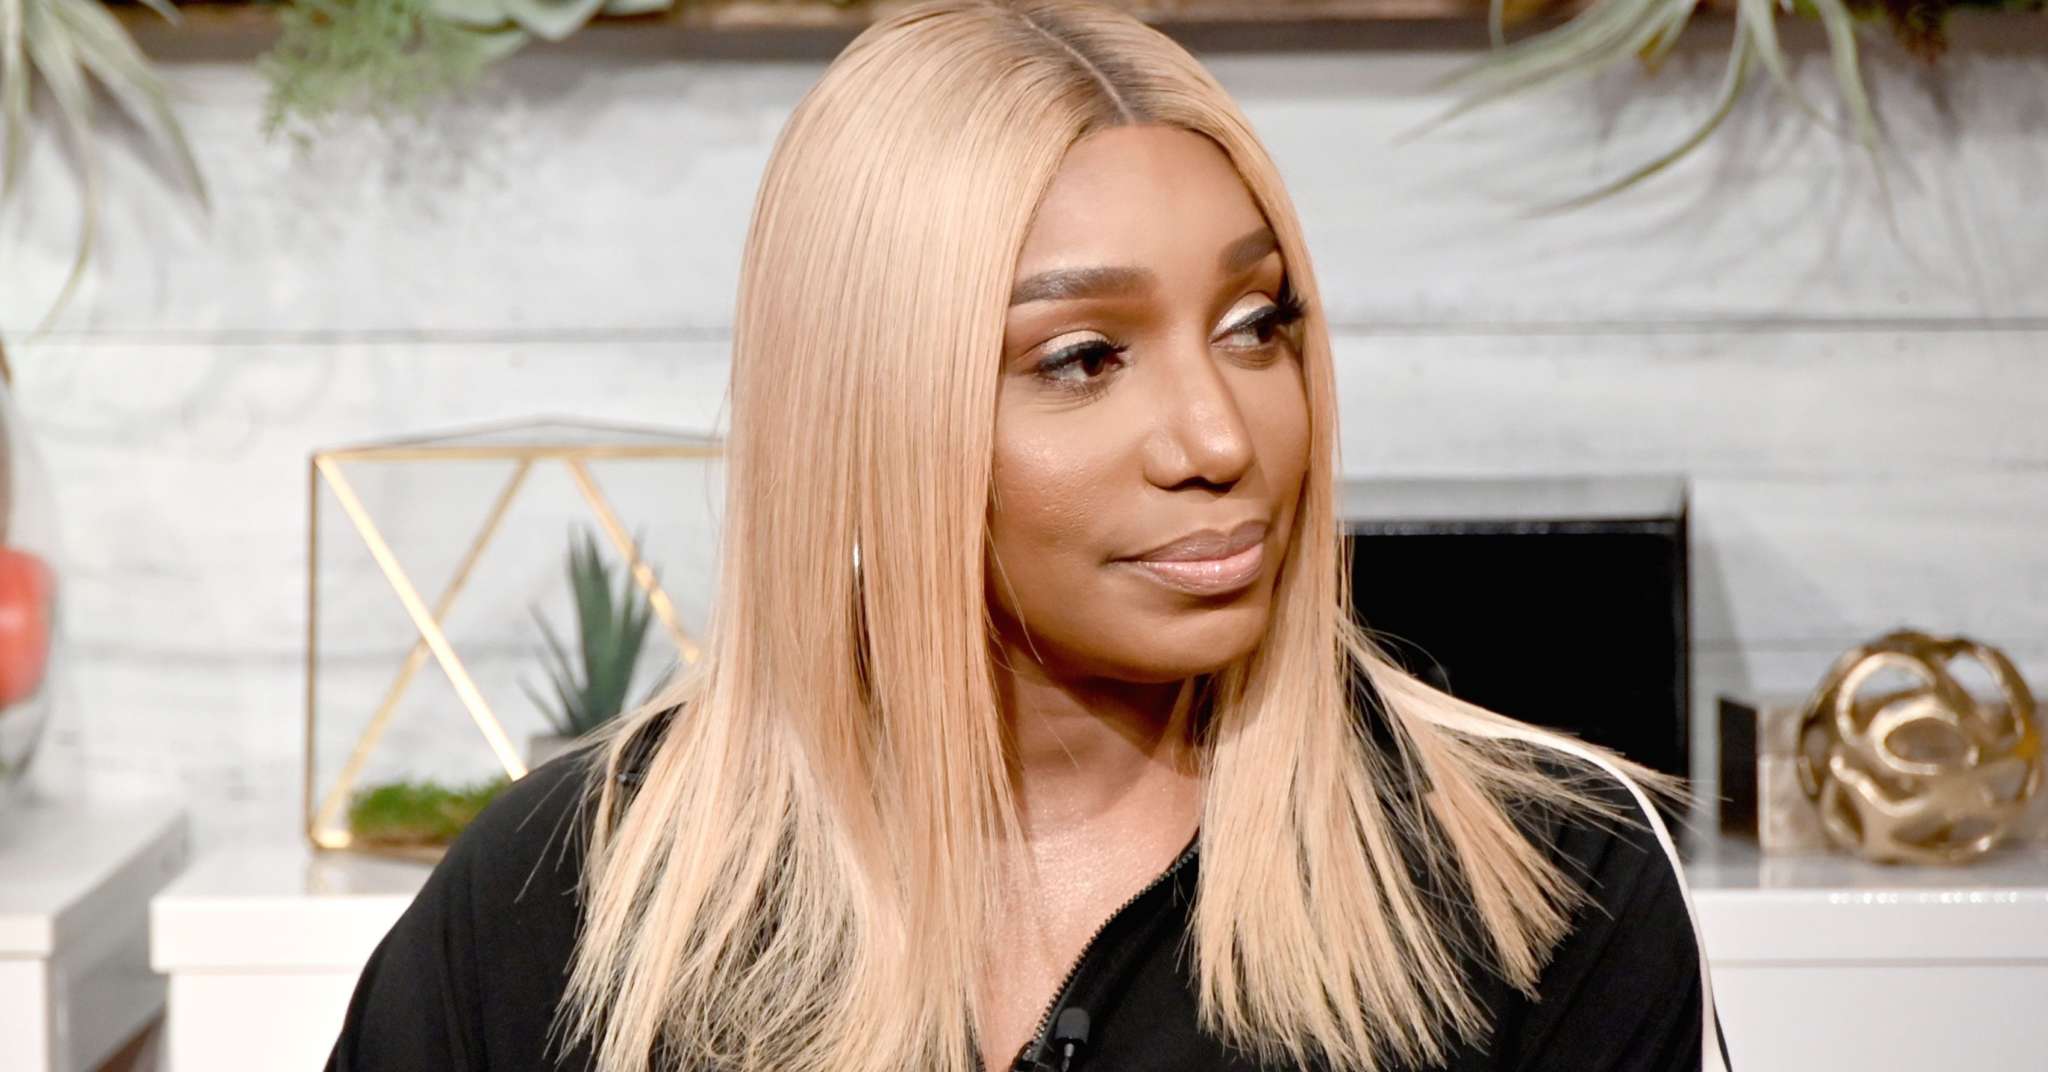 NeNe Leakes Uploads The Second Part Of Her 'Cocktails And Conversation' Talk With Jennifer Williams